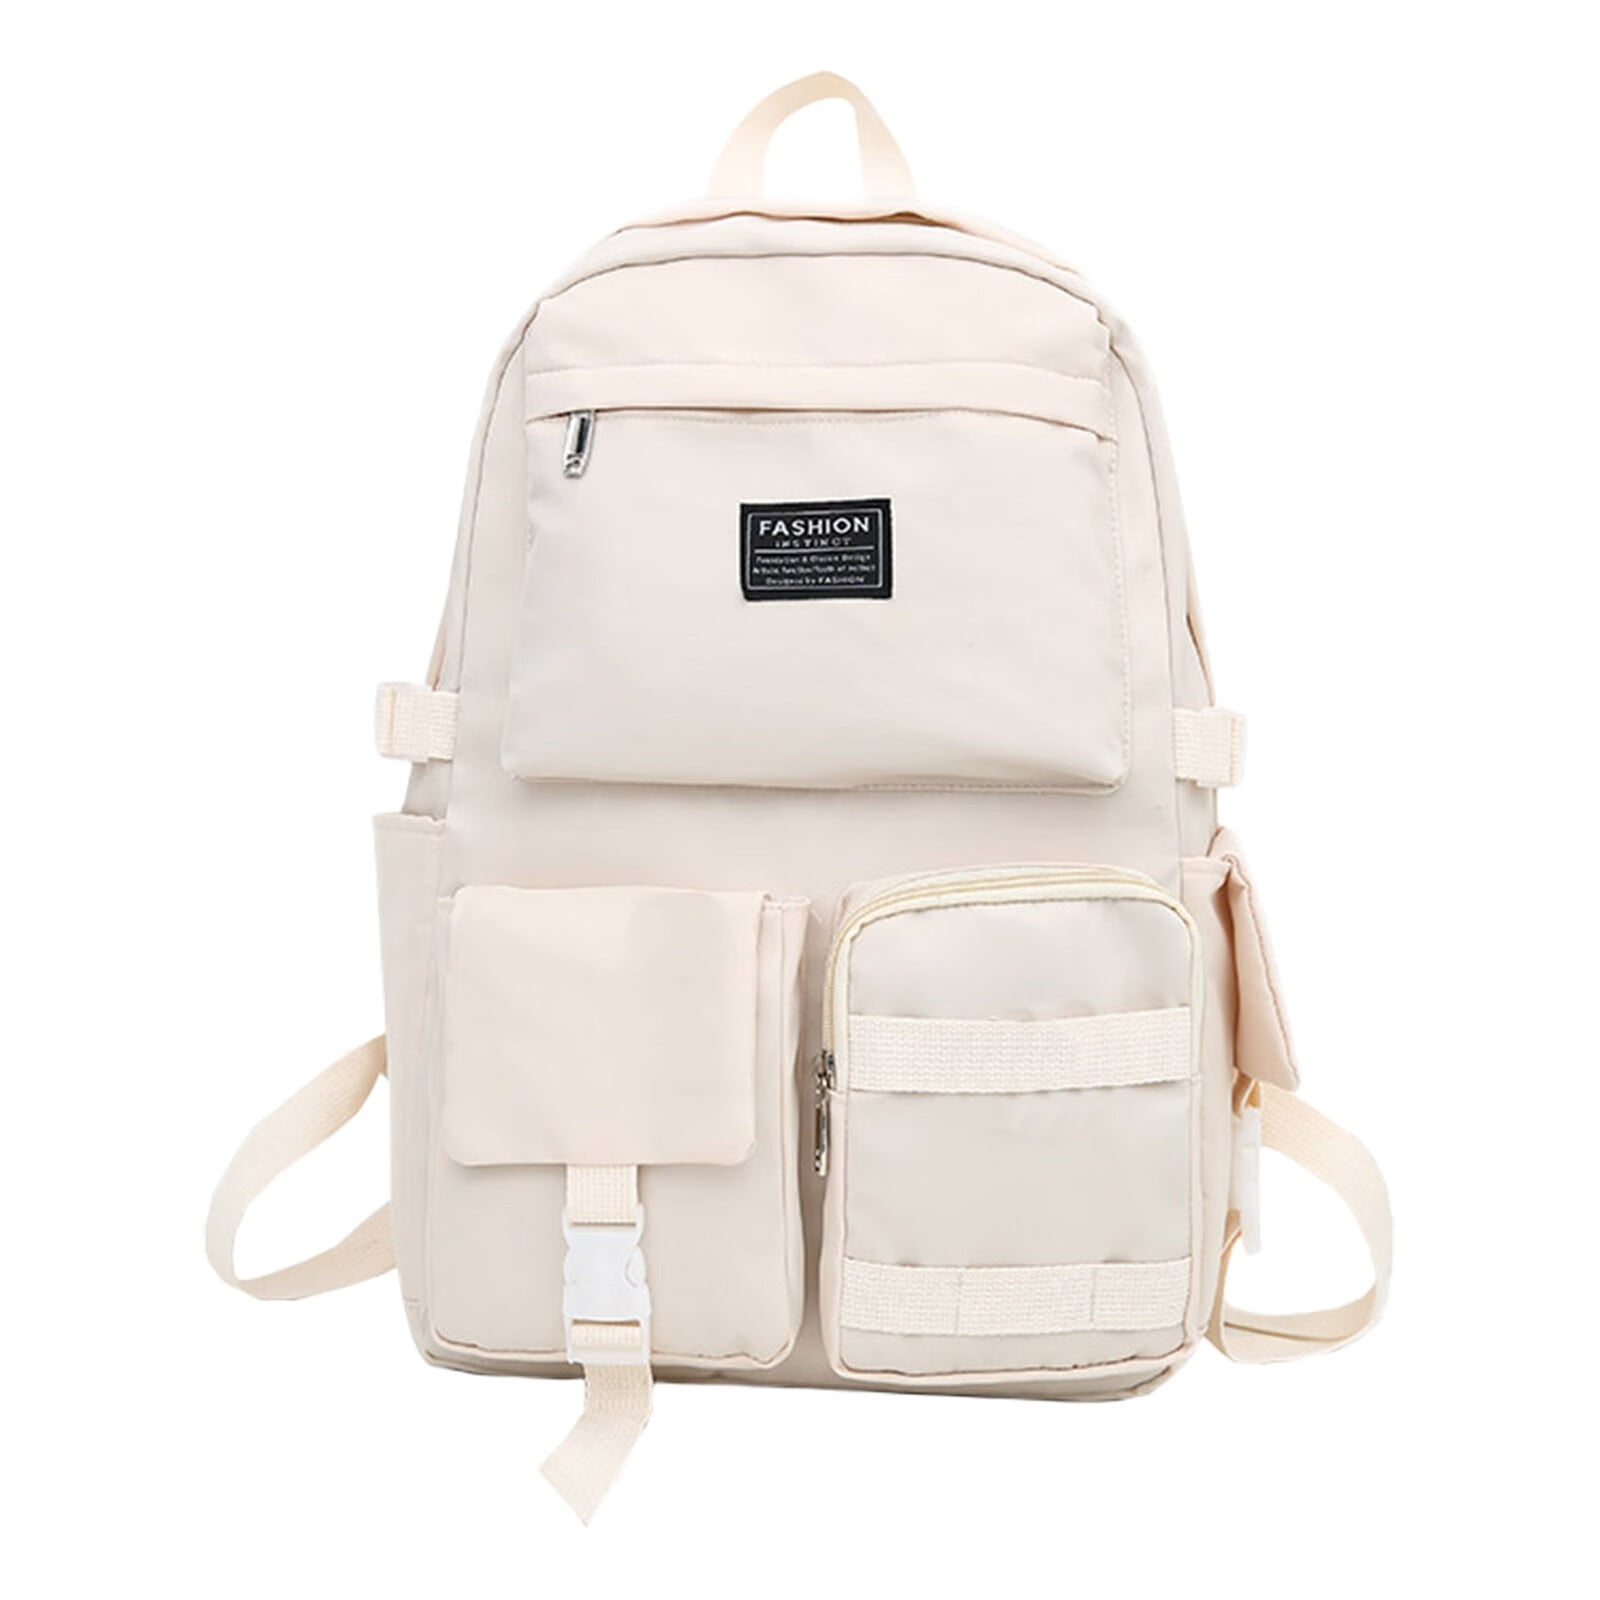  DWONDFORT Fashion Backpack Combination With Lunch Bag Pencil  Bag Travel Schoolbag (BACKPACK-2) : Clothing, Shoes & Jewelry